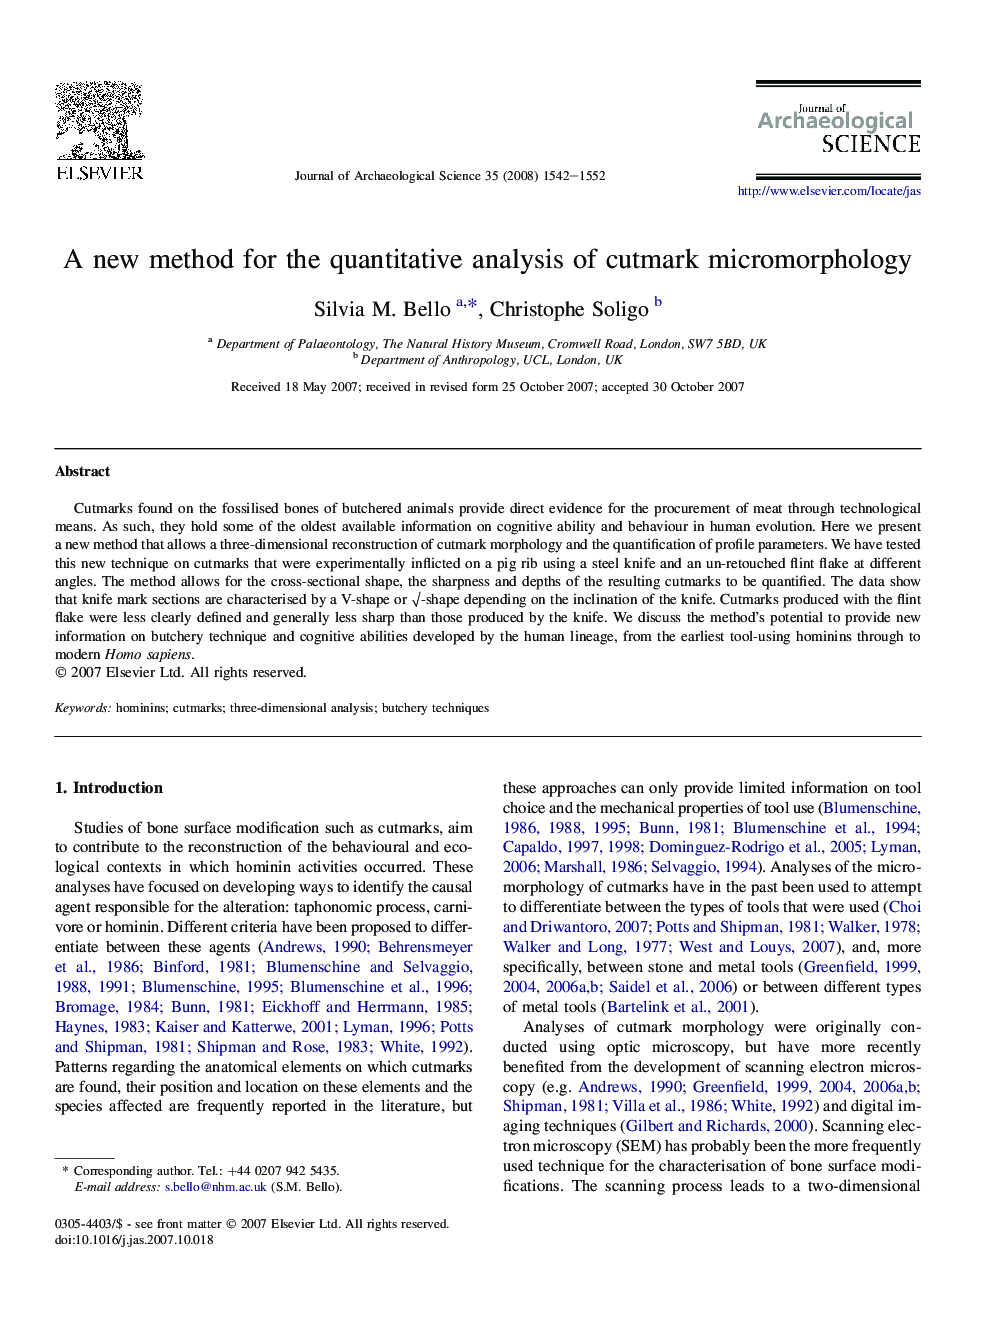 A new method for the quantitative analysis of cutmark micromorphology